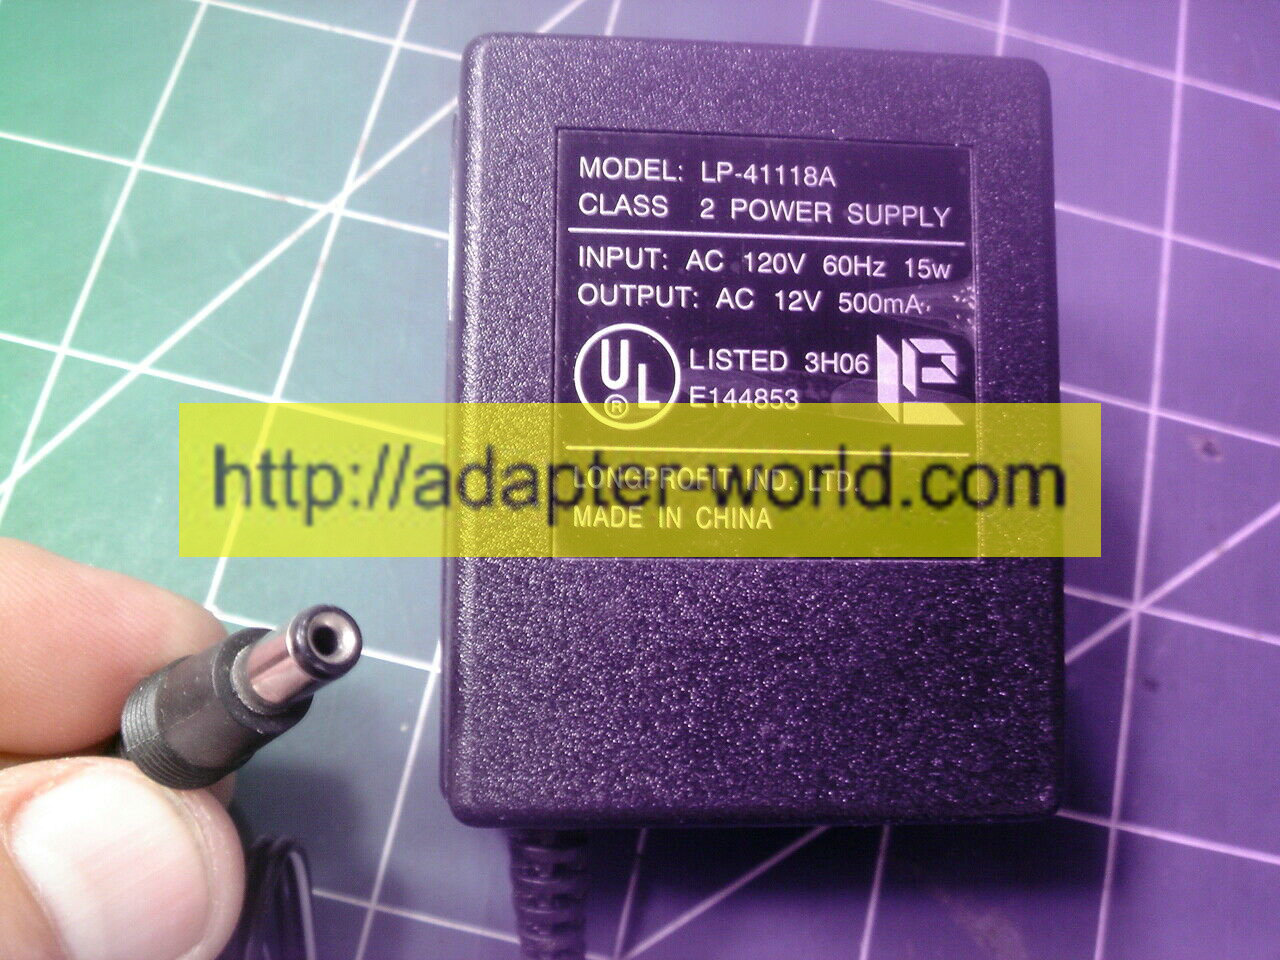 *100% Brand NEW* CORD LP-41118A 12VAC 500mA AC/AC WALL WART POWER SUPPLY ADAPTER POWER SUPPLY